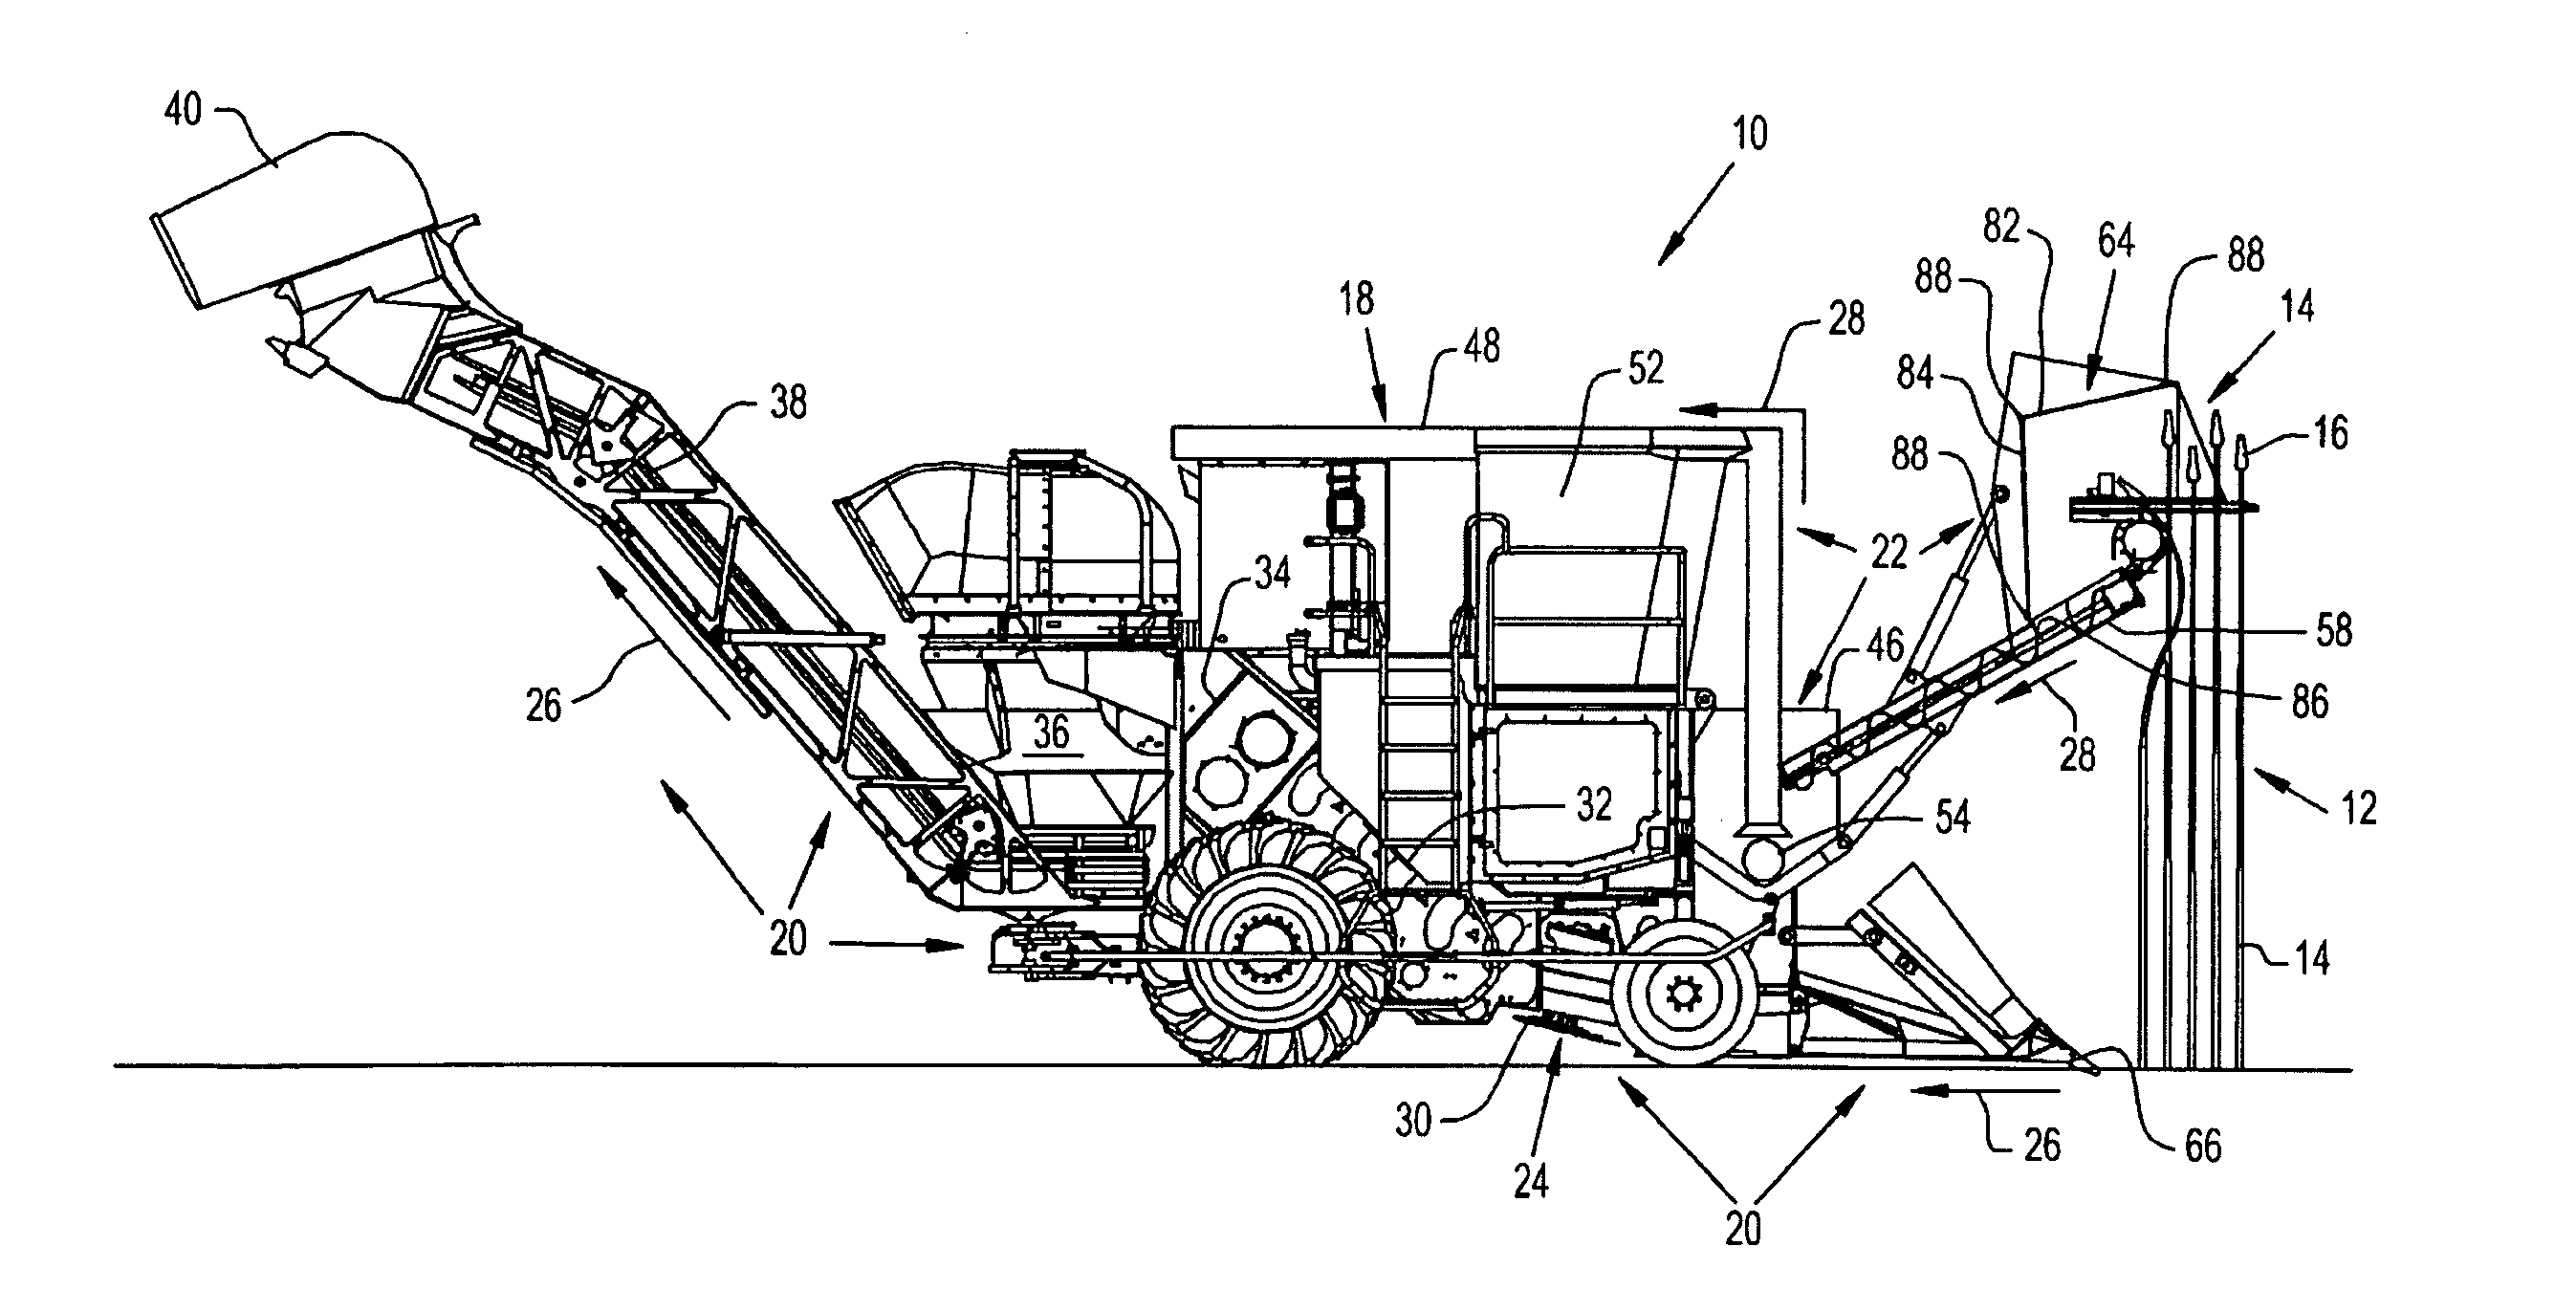 Seed gathering device for use by an agricultural harvester